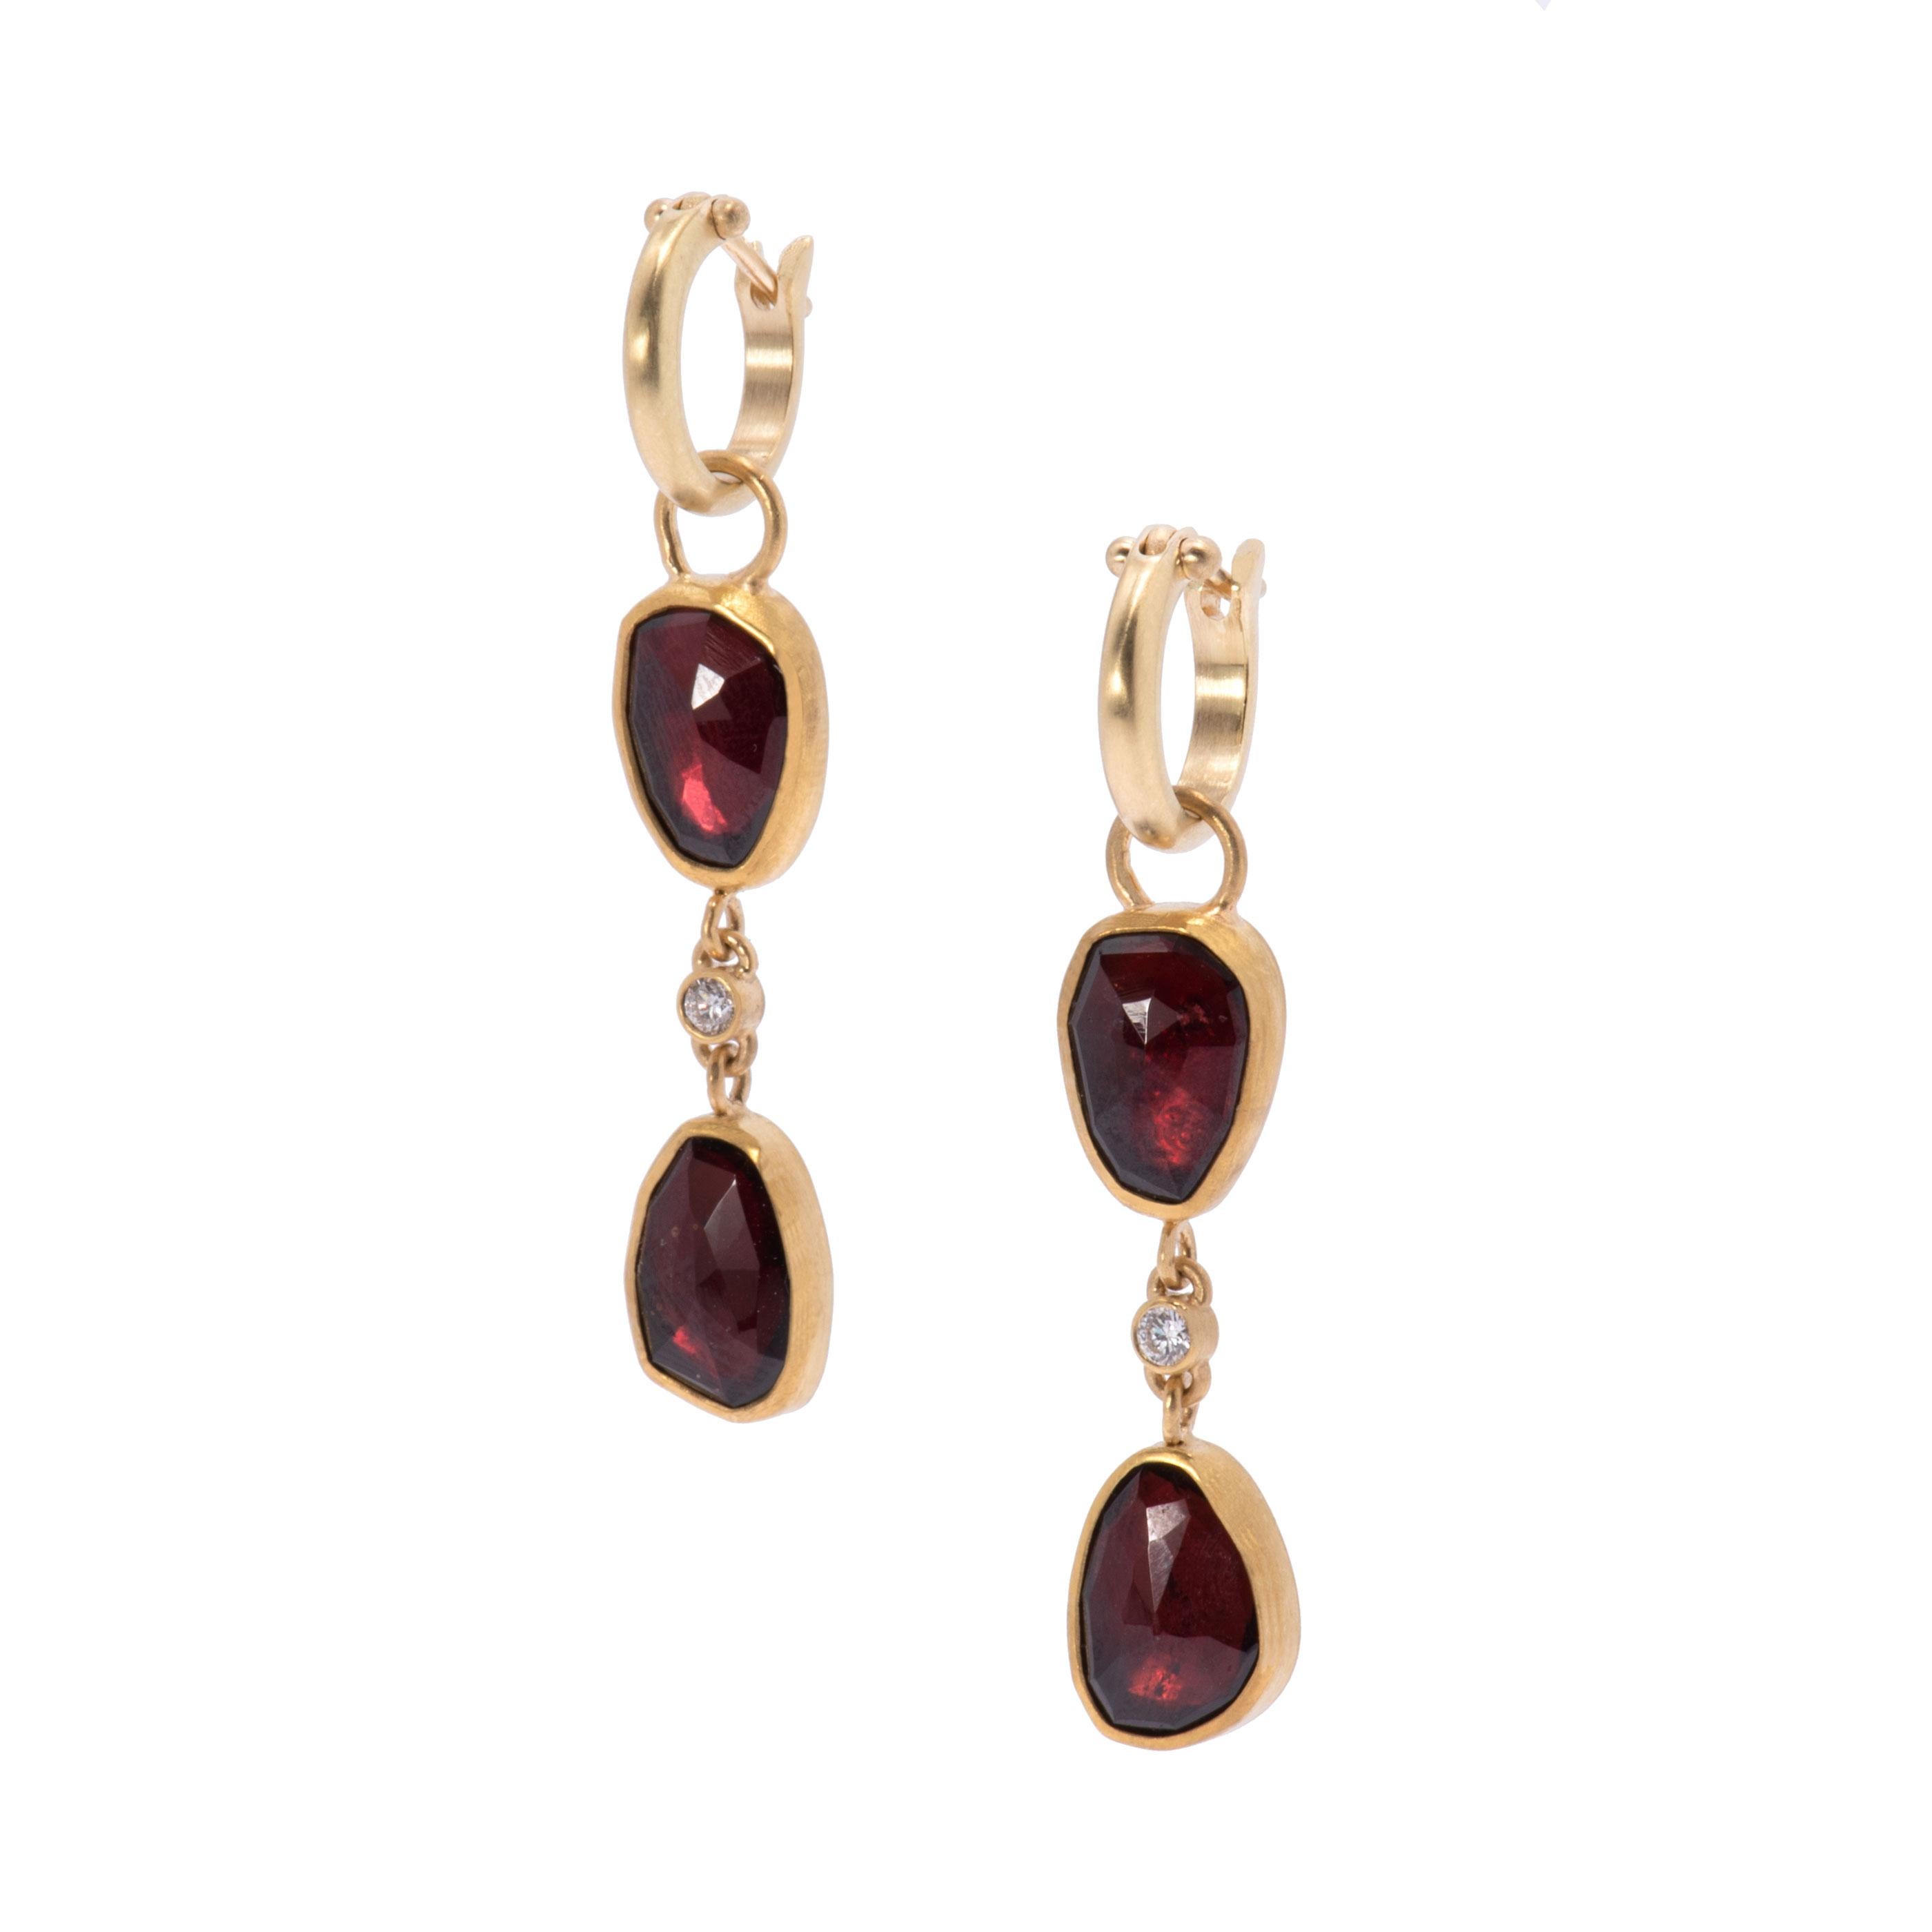 Rose Cut Garnets are set in 22 karat gold and hang tiered in pairs with winking .12 tcw diamonds and are suspended from small 18 karat gold plain hoops. Each rose cut garnet is unique as are the bezel settings which are backed in sterling silver.